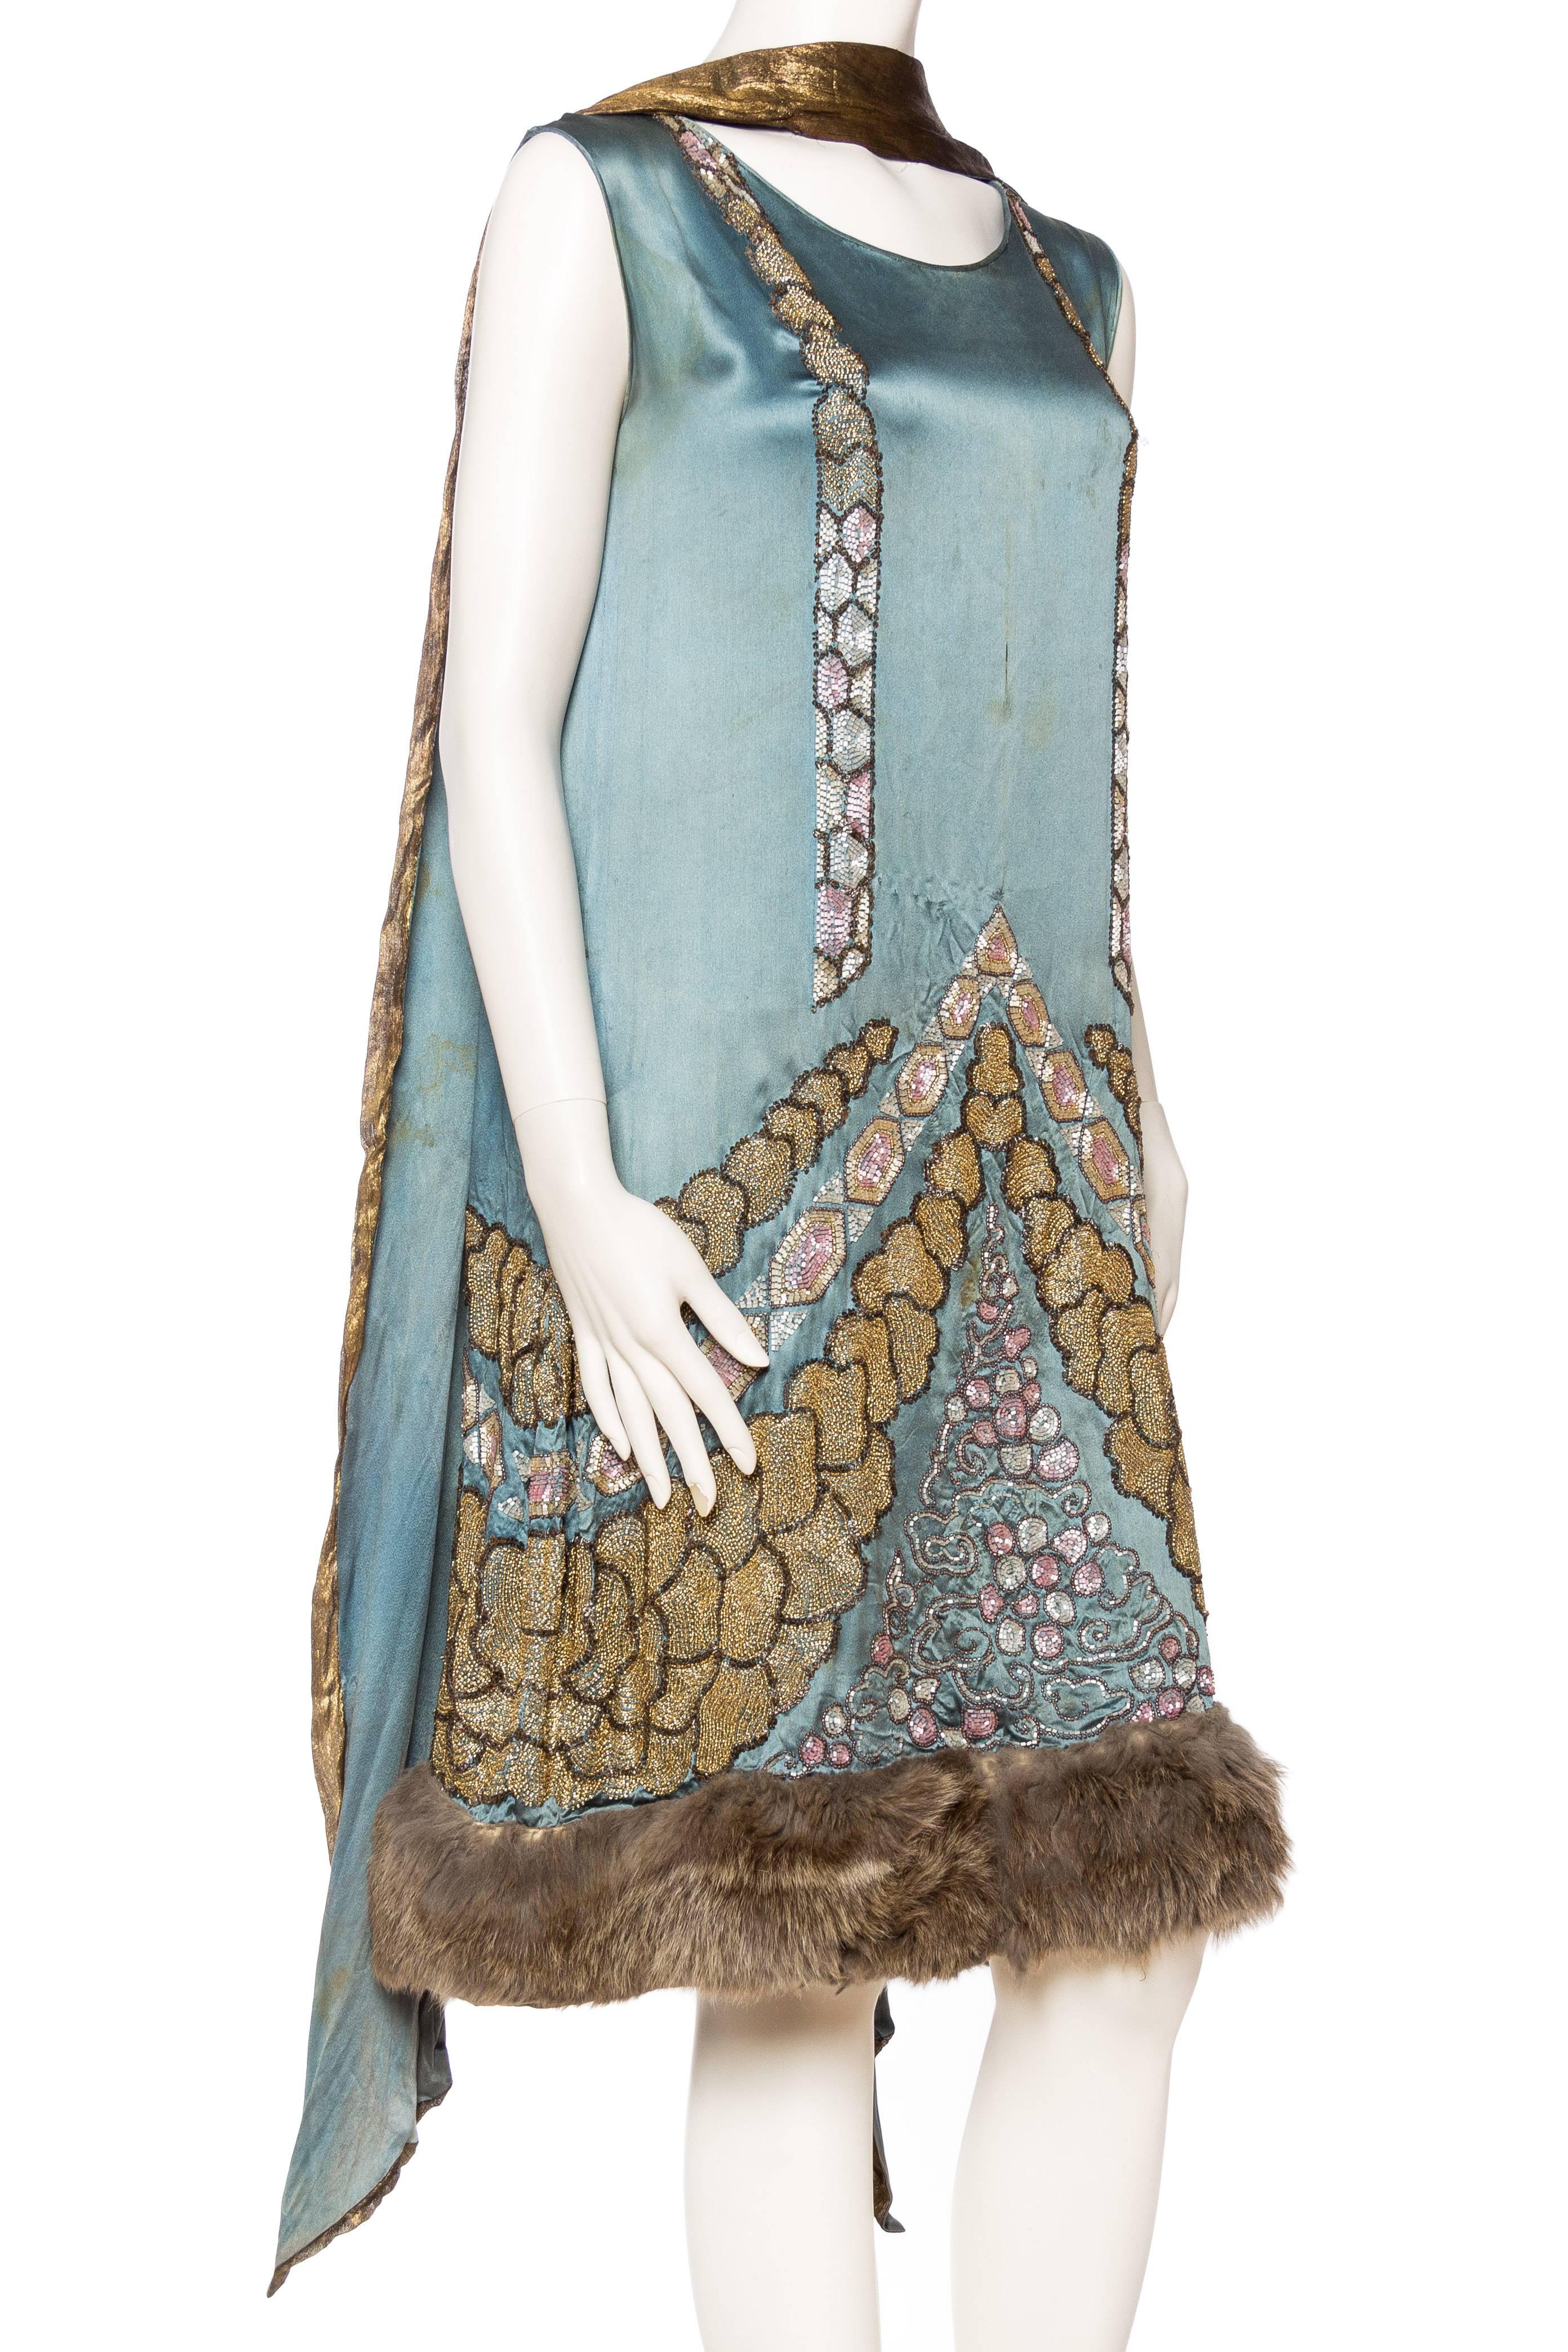 1920S Teal Silk Charmeuse  Deco Beaded Cocktail Dress With Fur Hem & Lamé Shawl In Excellent Condition For Sale In New York, NY